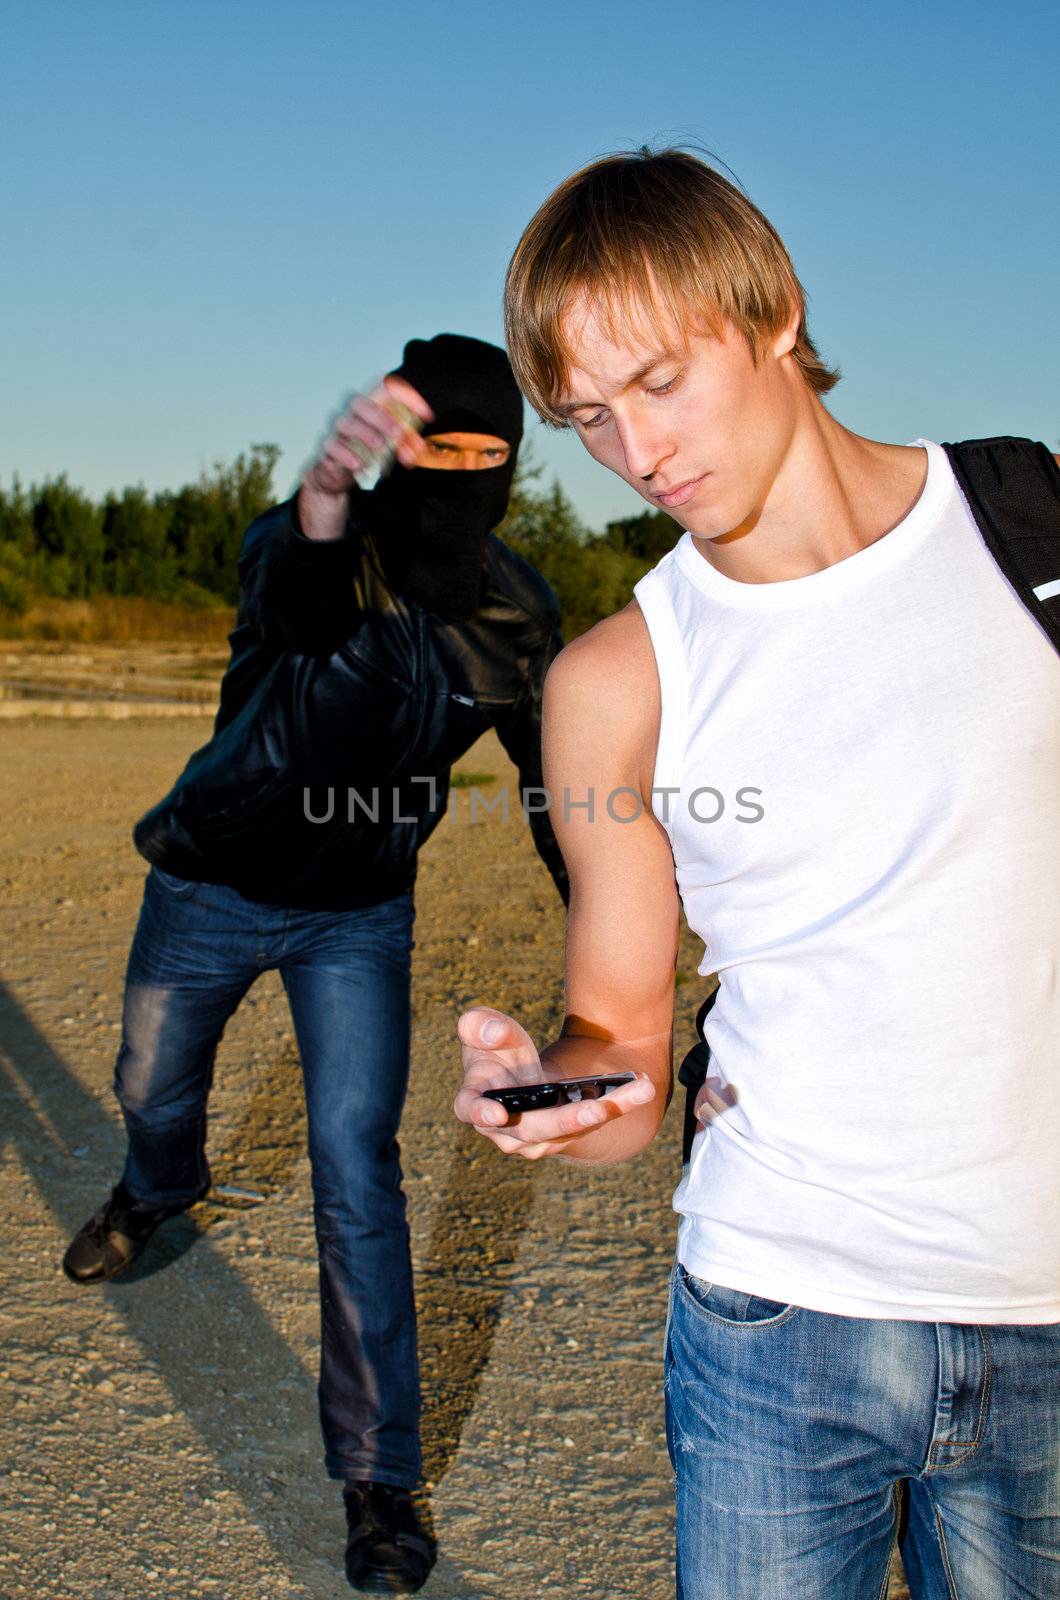 Bandit in mask trying to rob young man by dmitrimaruta